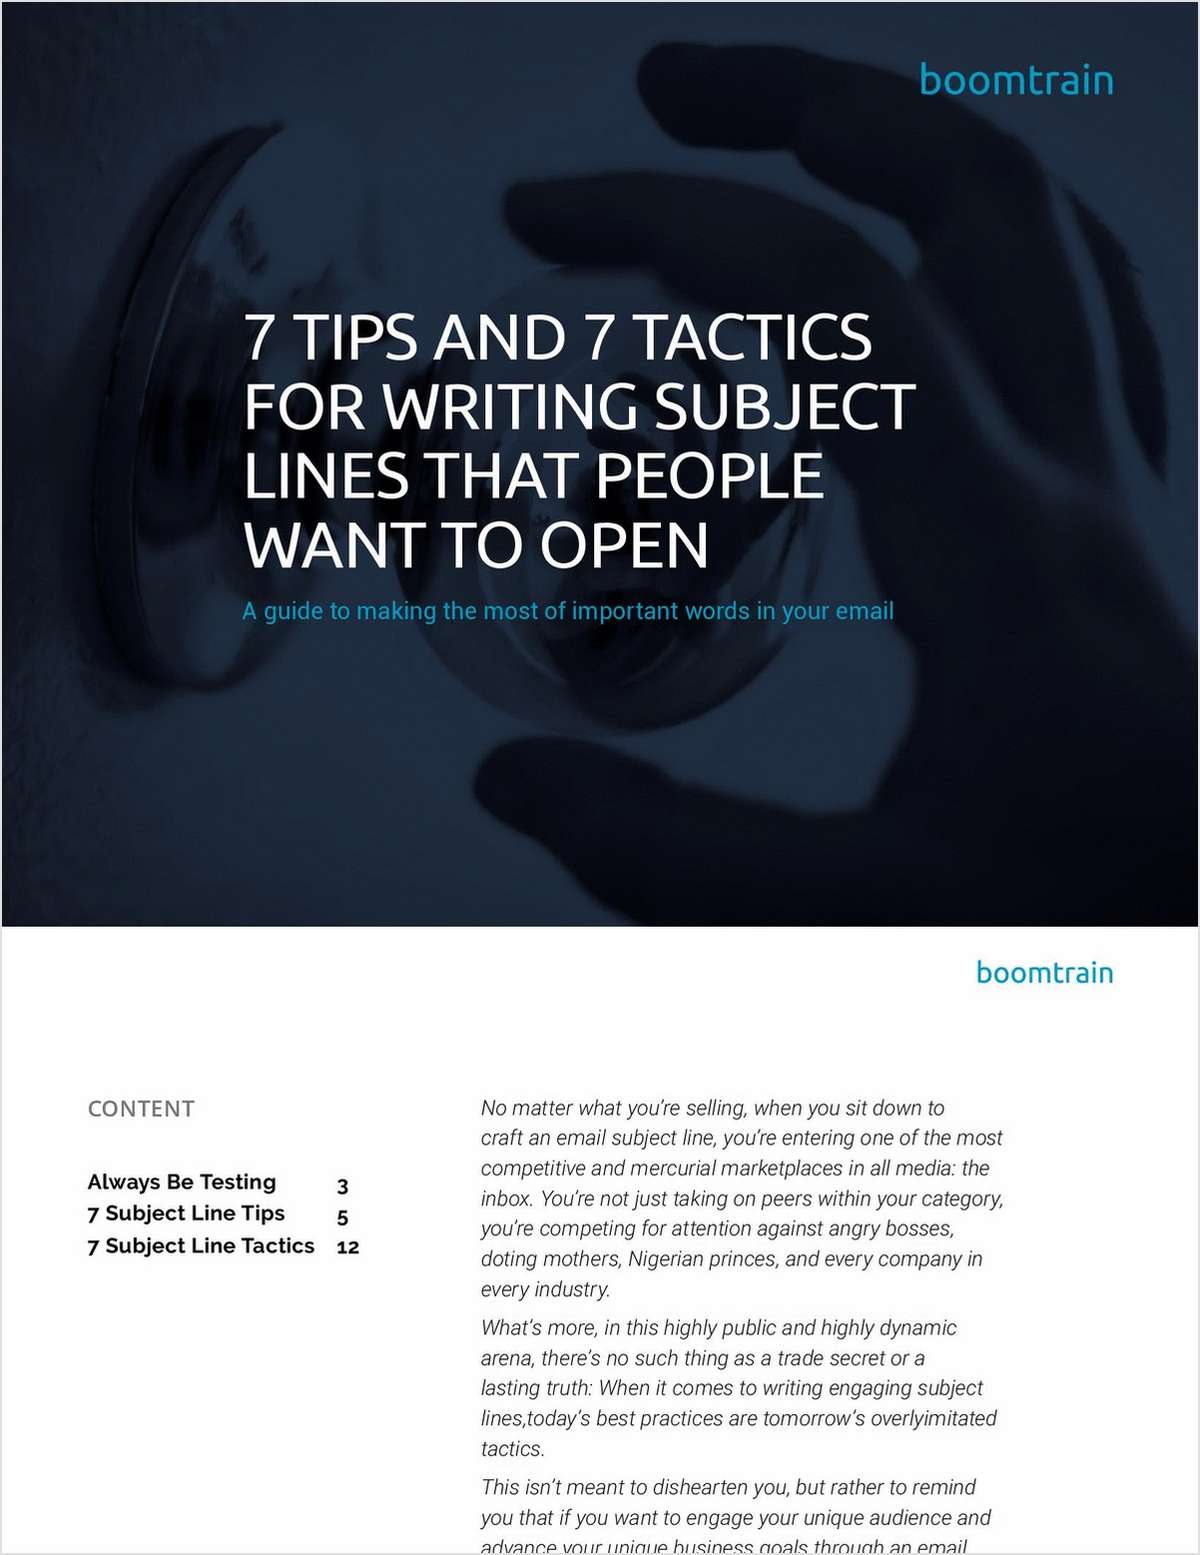 7 Tips and 7 Tactics for Writing Email Subject Lines that People Want to Open